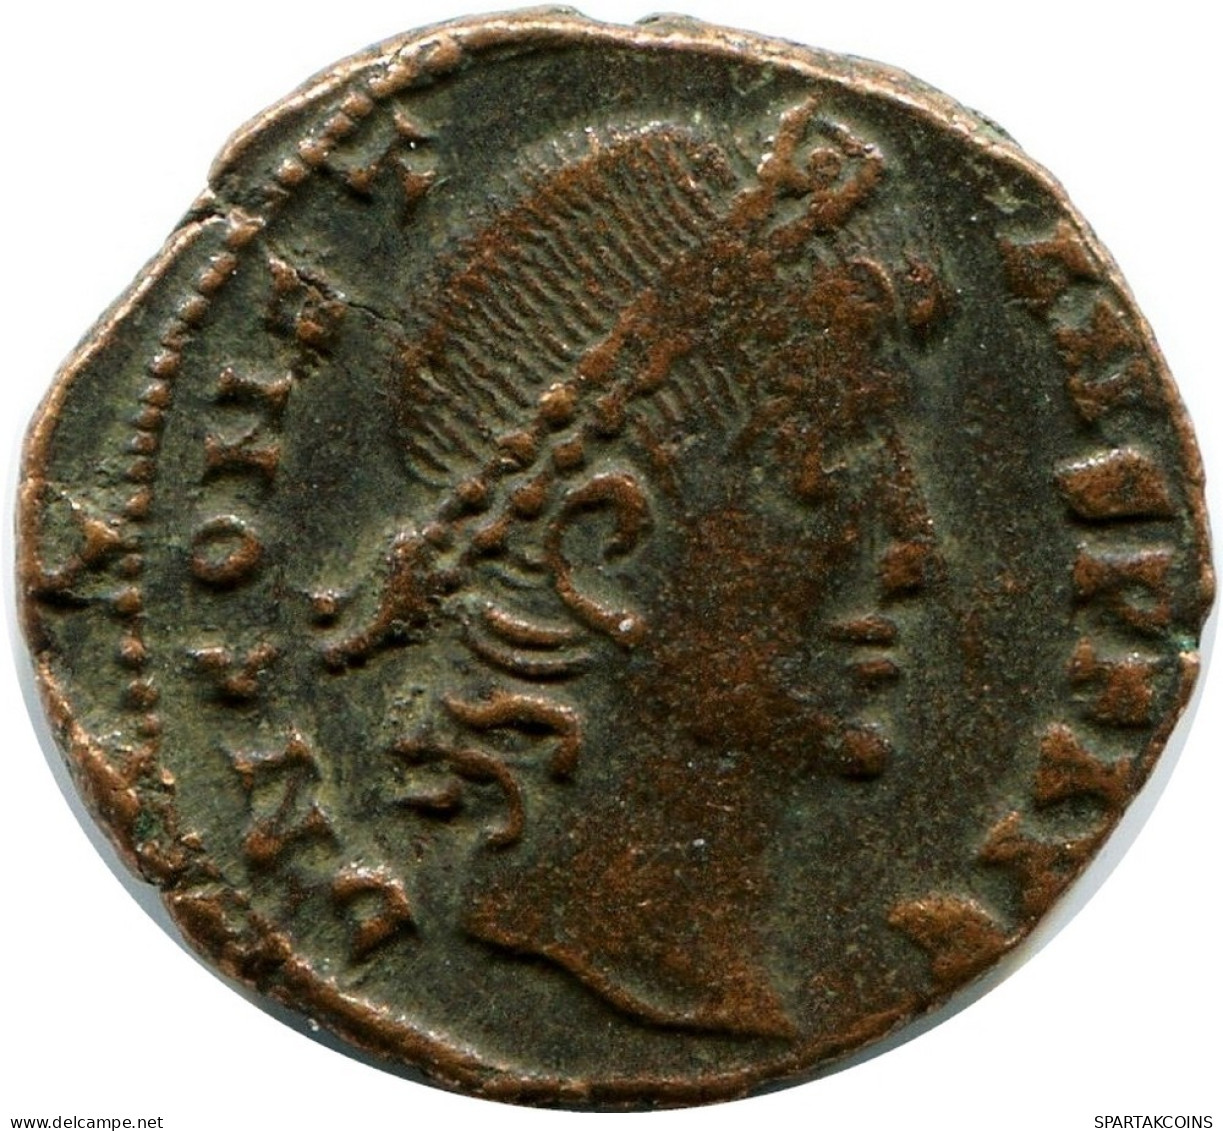 CONSTANS MINTED IN ALEKSANDRIA FOUND IN IHNASYAH HOARD EGYPT #ANC11435.14.D.A - El Impero Christiano (307 / 363)